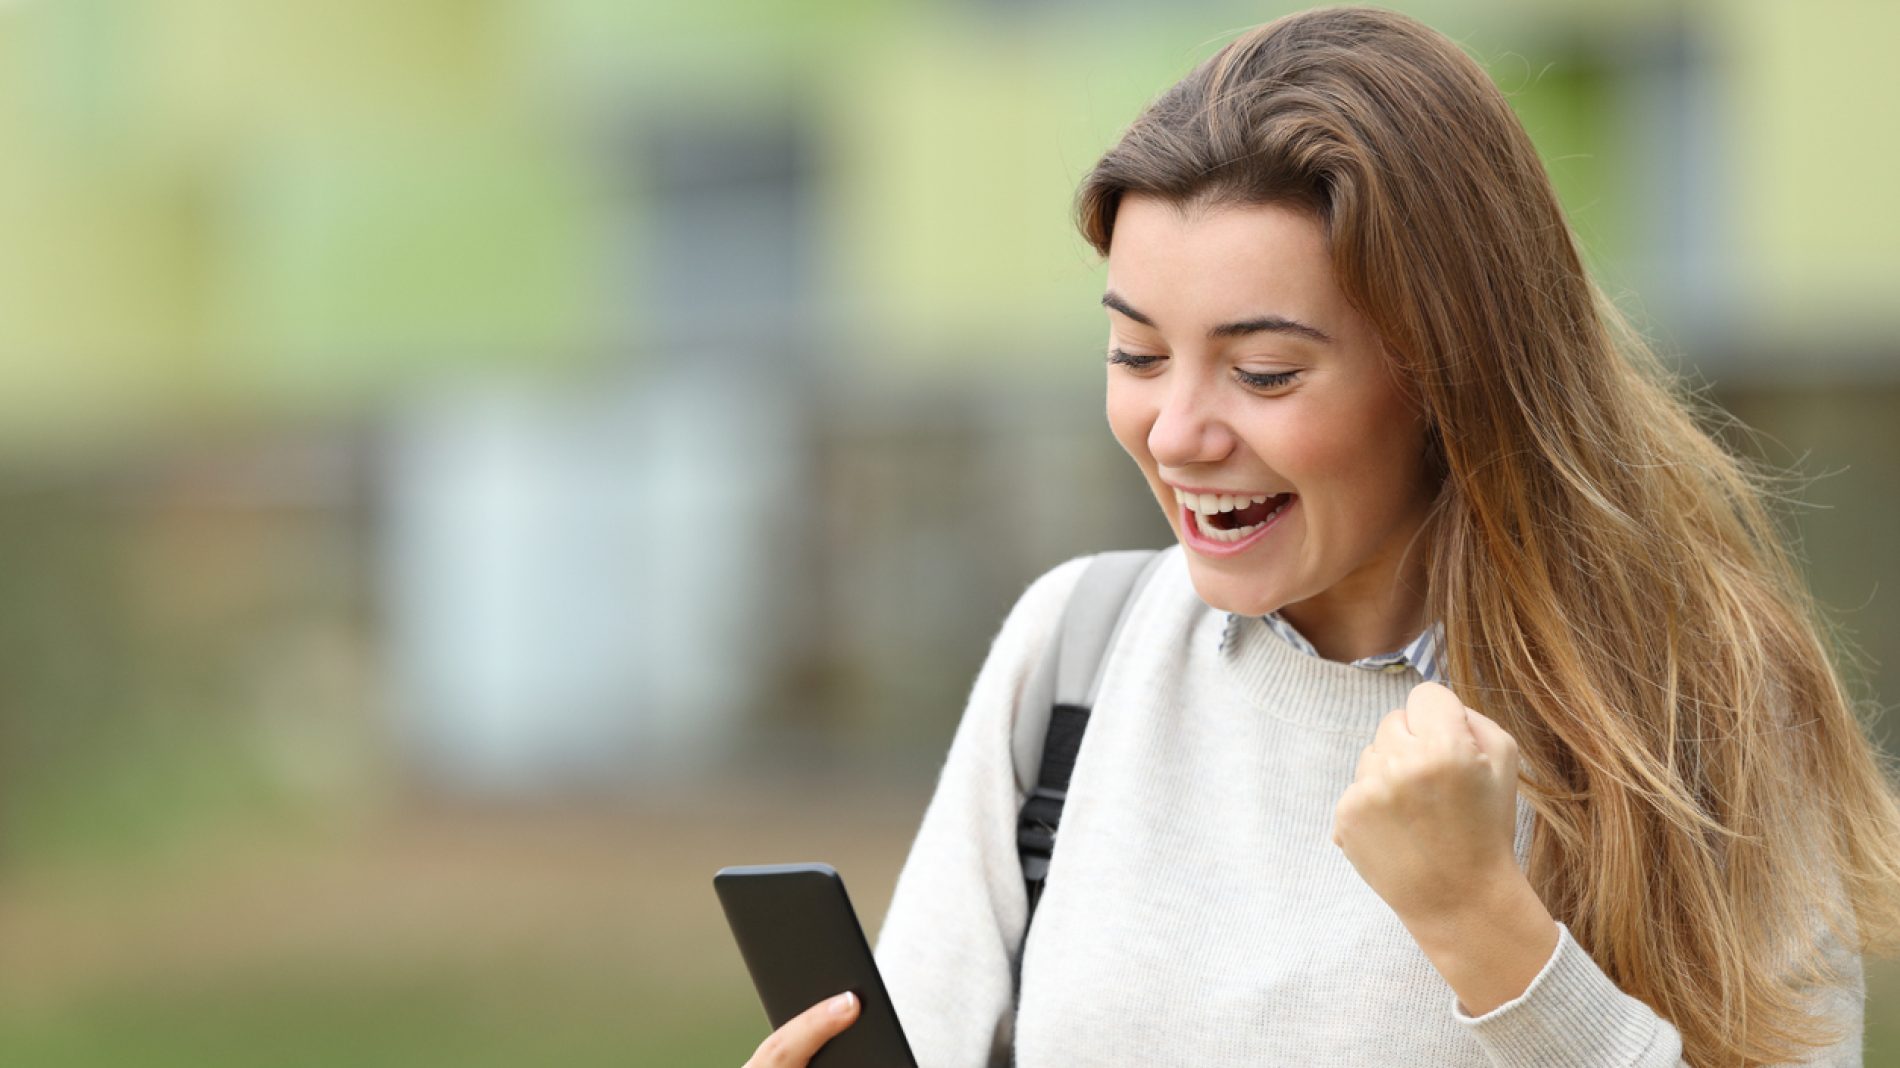 Excited student reading news on a smart phone